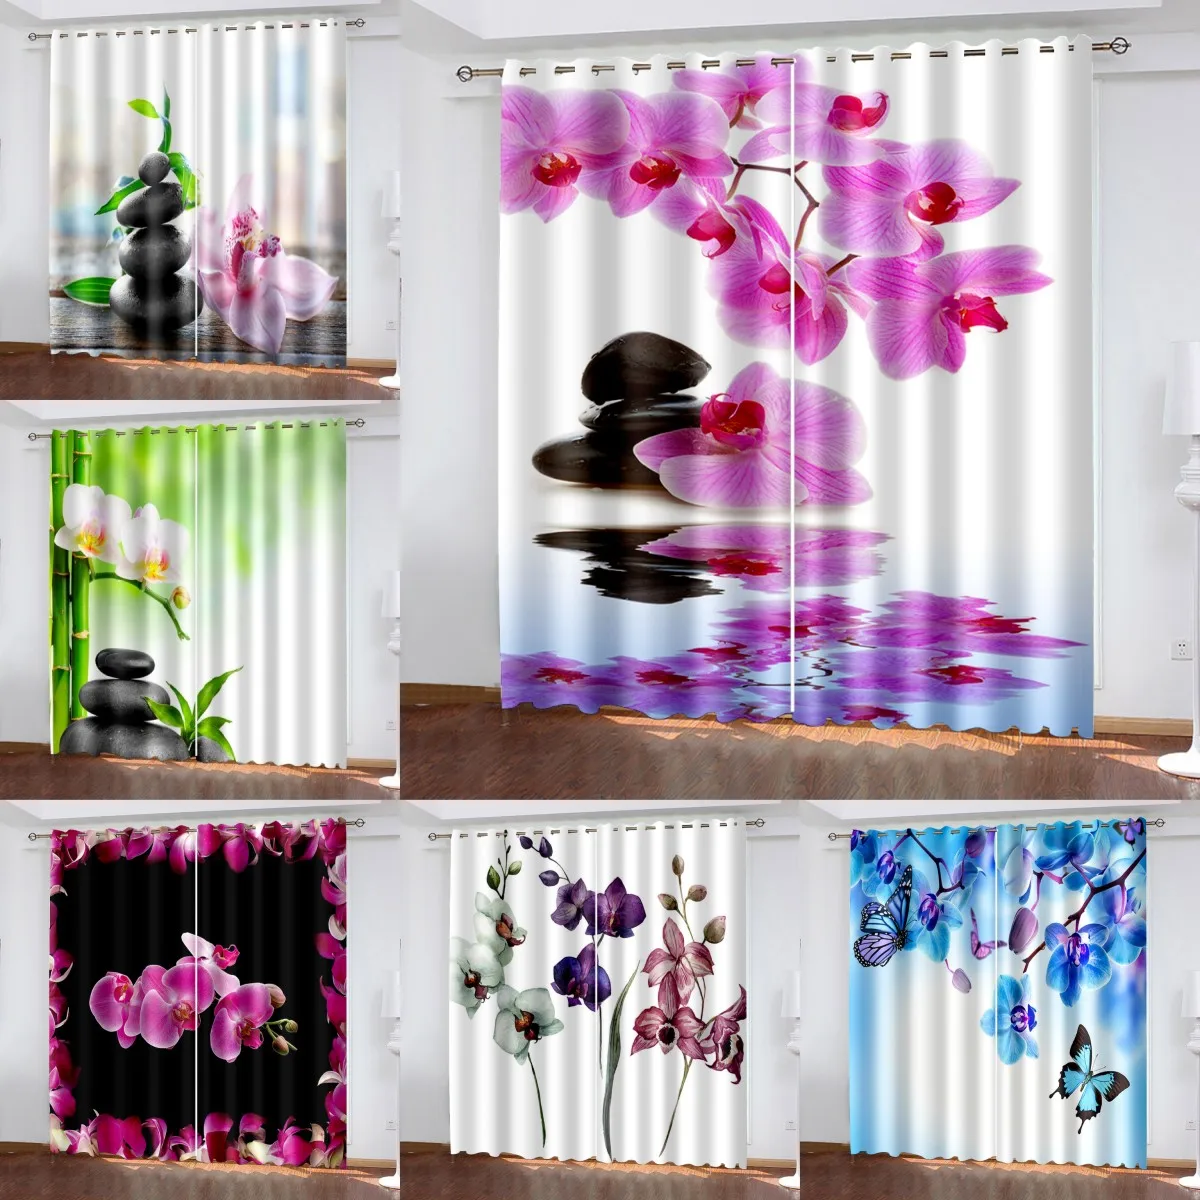 

2Pcs Phalaenopsis Floral Curtain Semi Blackout For Living Dining Room Bedroom Kitchen Window Transparent Flowers Curtains